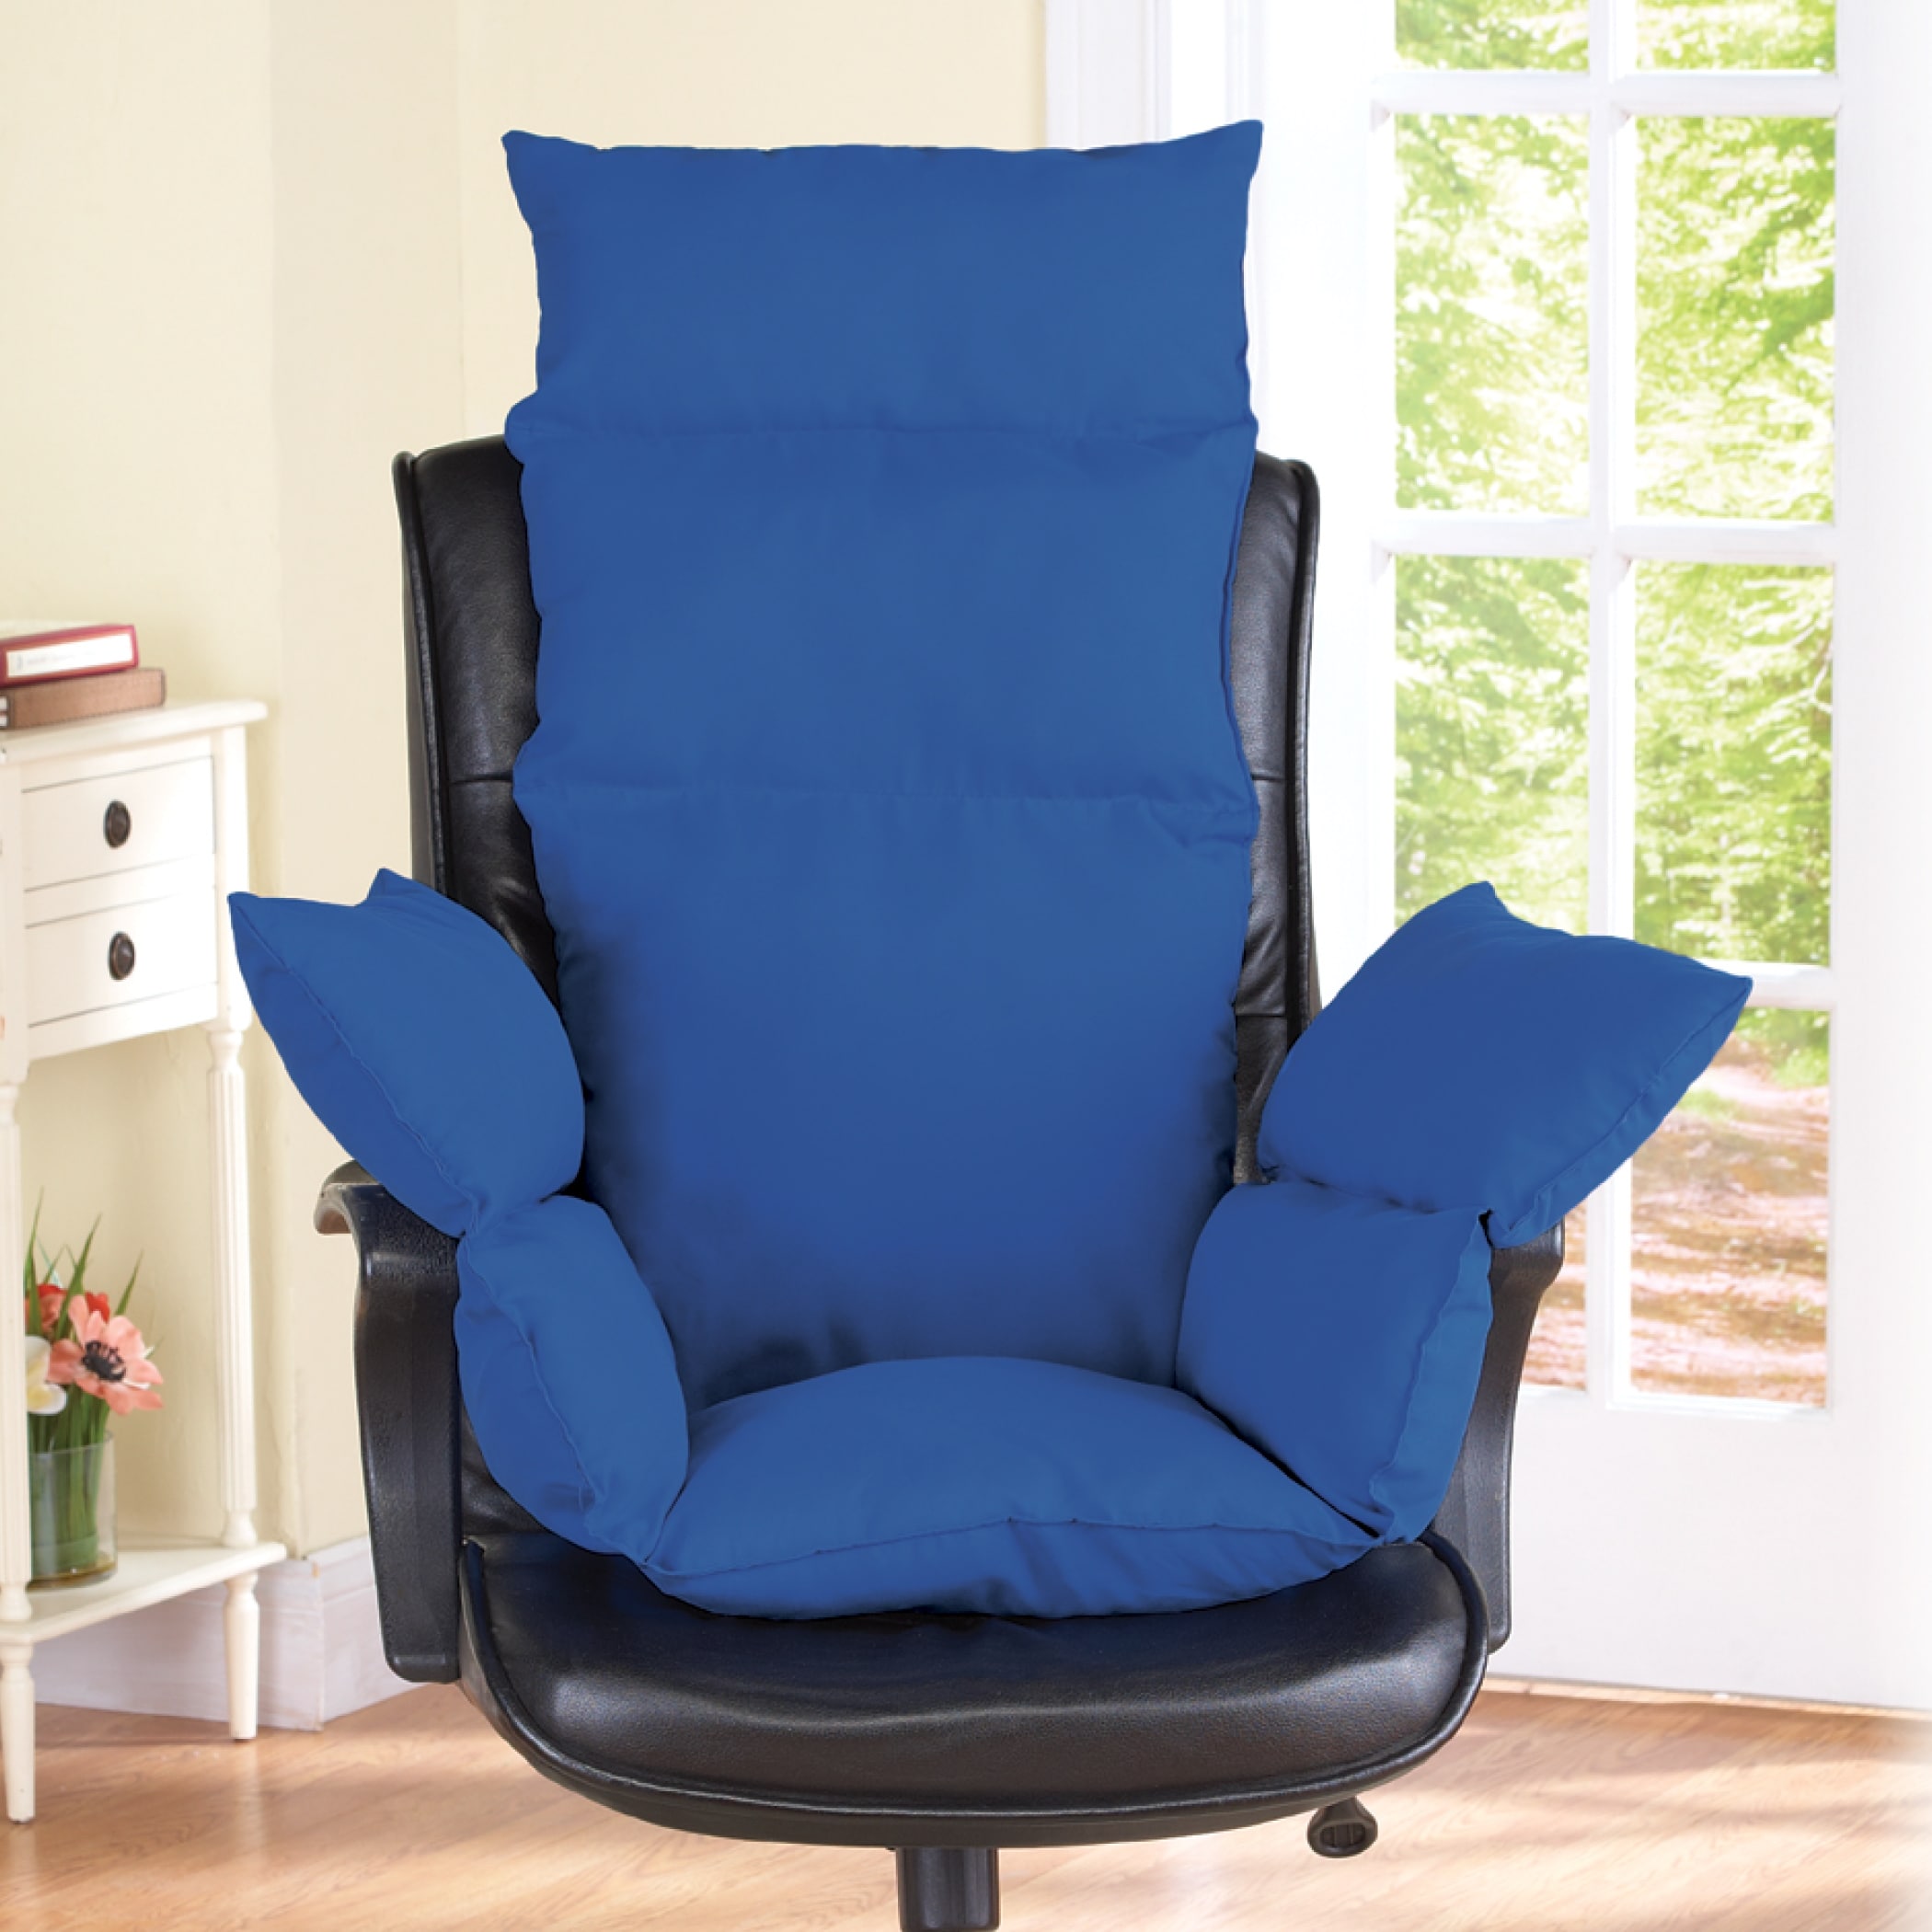 https://ak1.ostkcdn.com/images/products/is/images/direct/f011e9fe1b13c26244aa434625abc79049290db0/Extra-Support-Cozy-Chair-Cushion.jpg